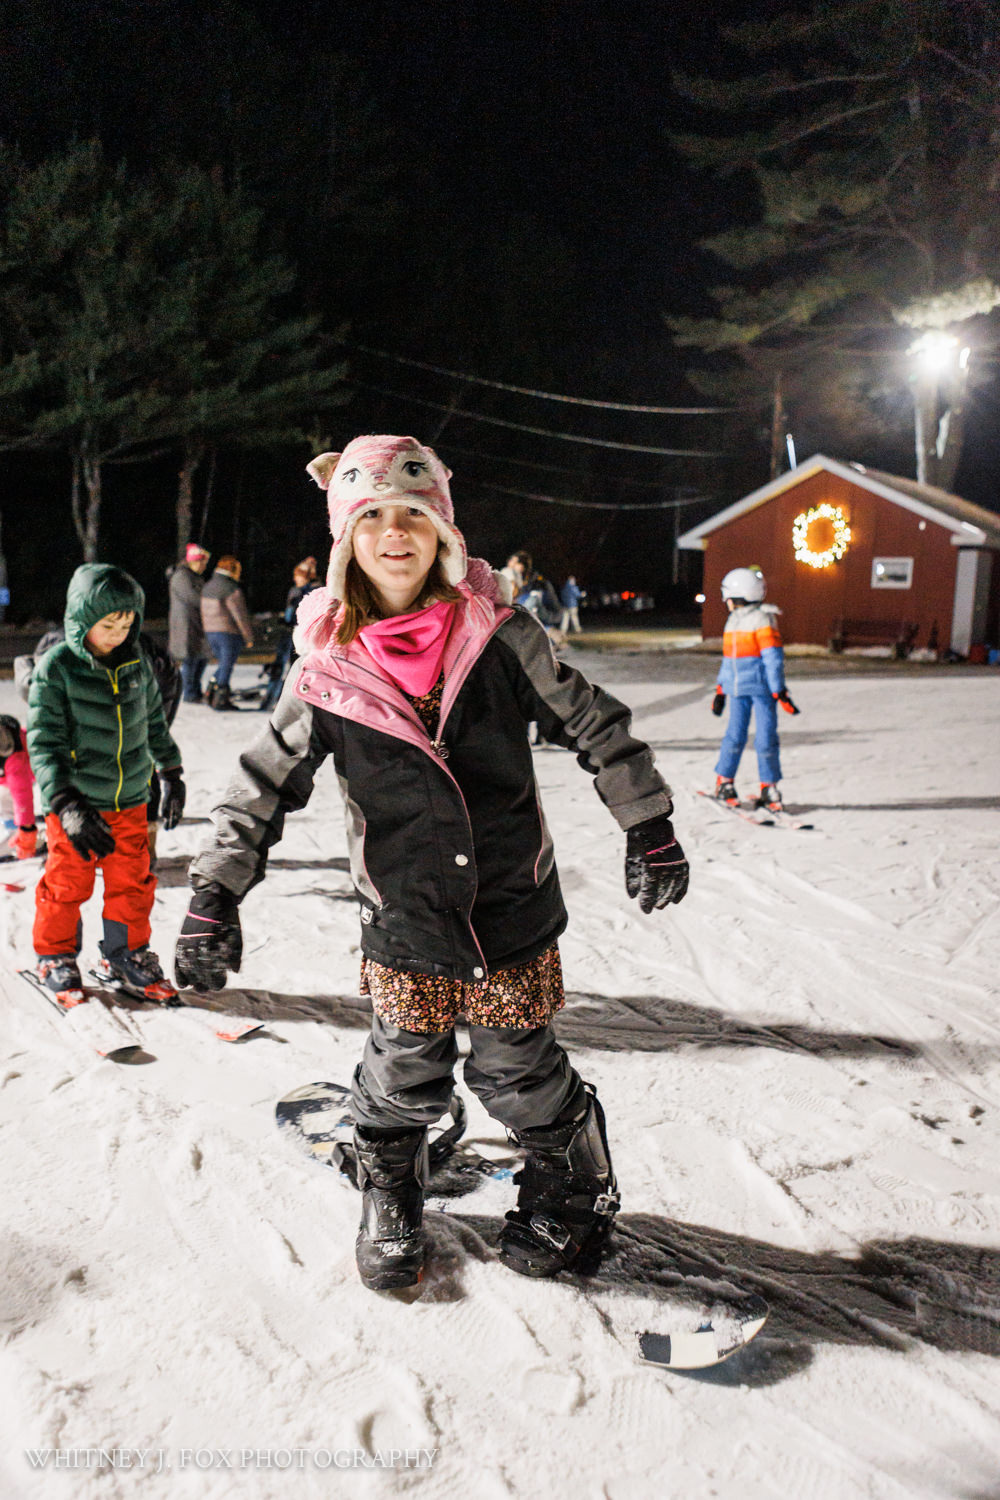 650 winter kids welcome to winter 2022 lost valley auburn maine documentary event photographer whitney j fox 3977 w